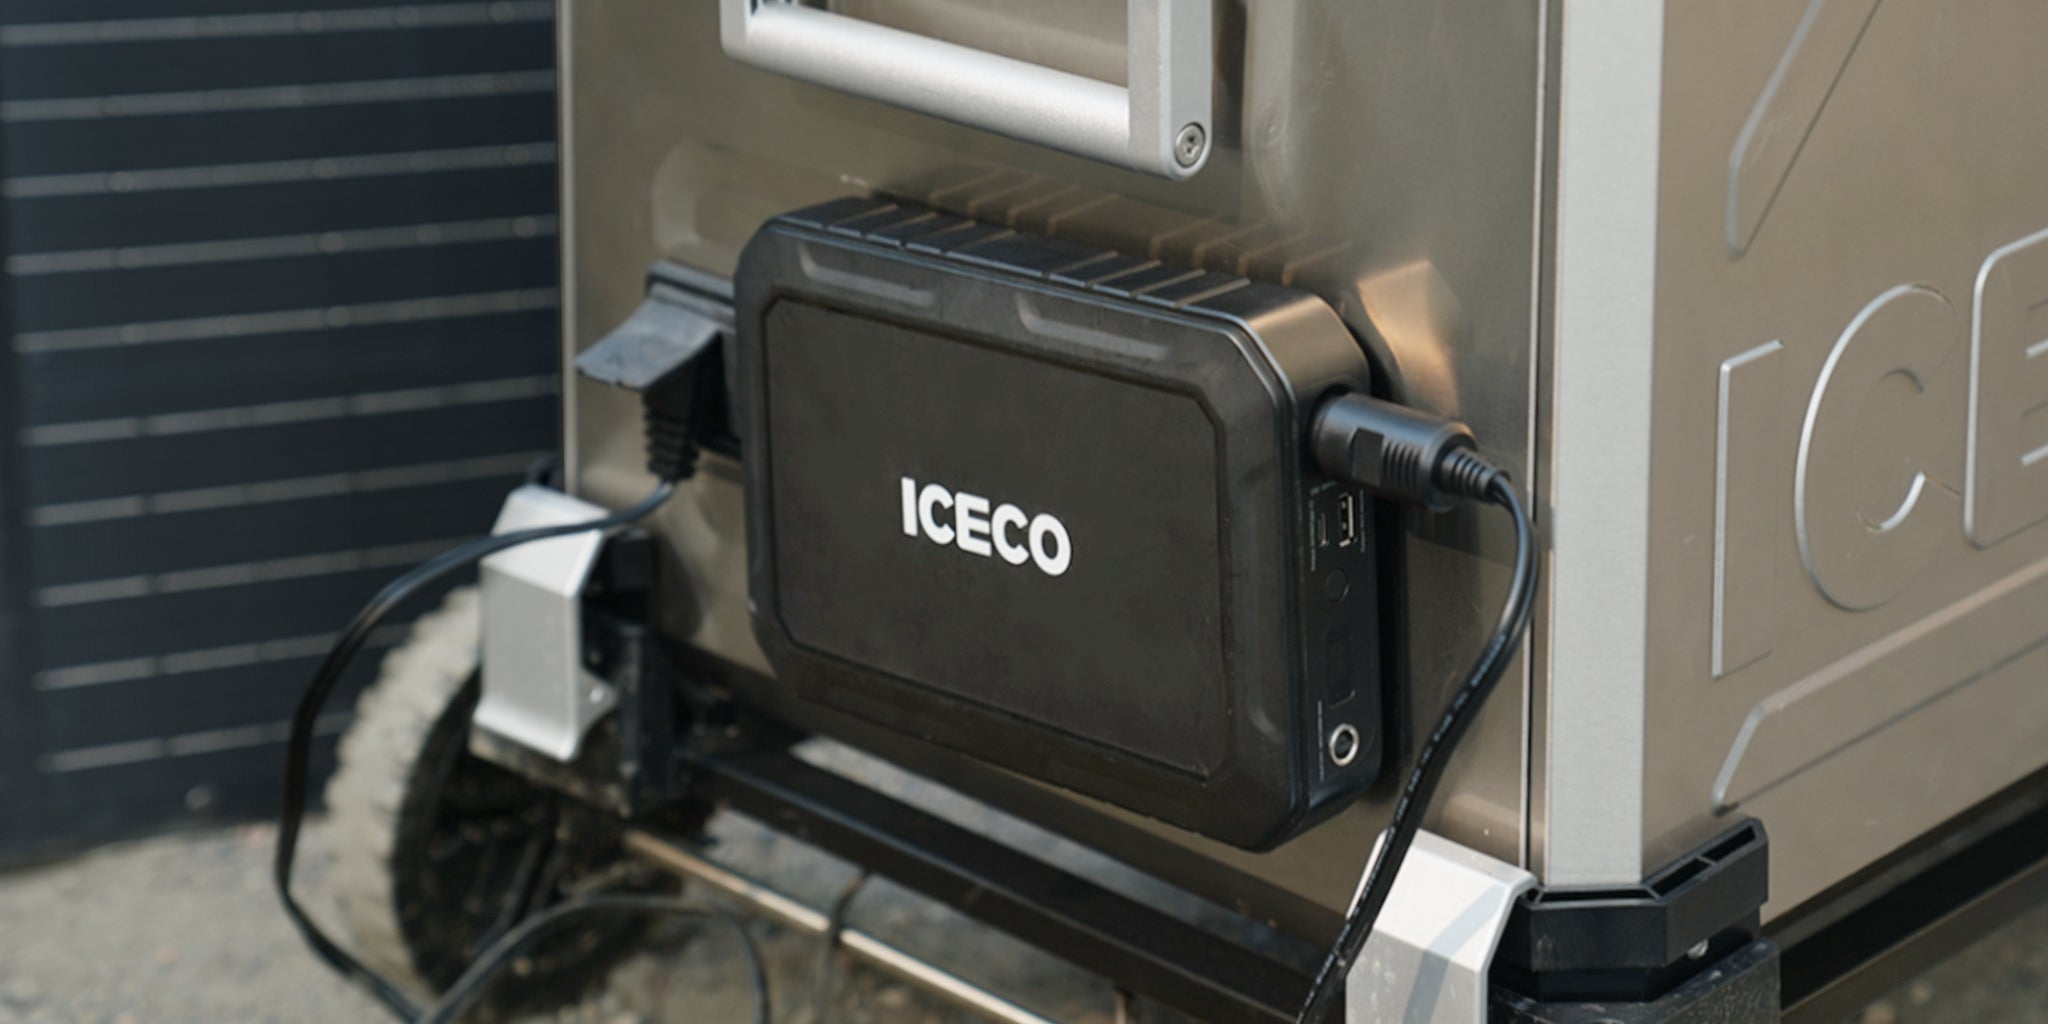 ICECO Magnetic Power Bank- The Revolutionary Way to Charge Devices and Portable Fridge